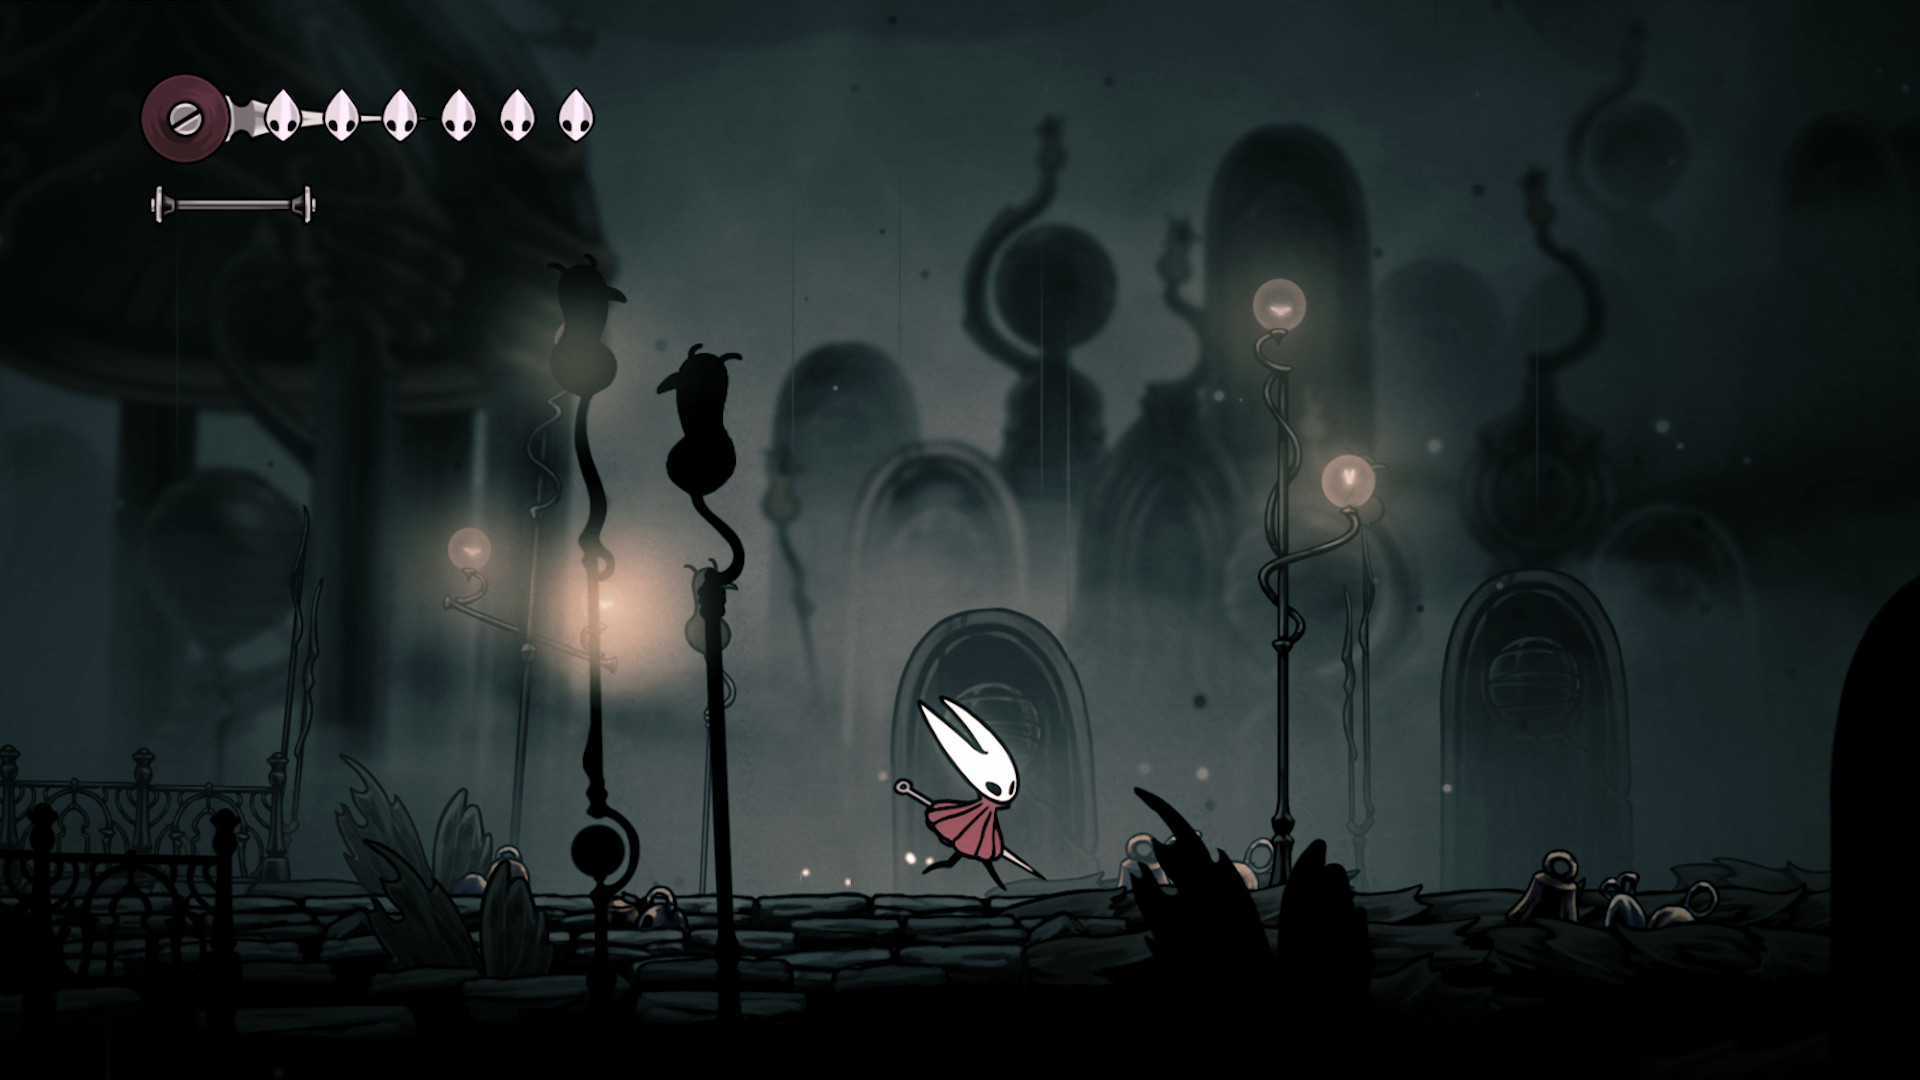 is hollow knight silksong out